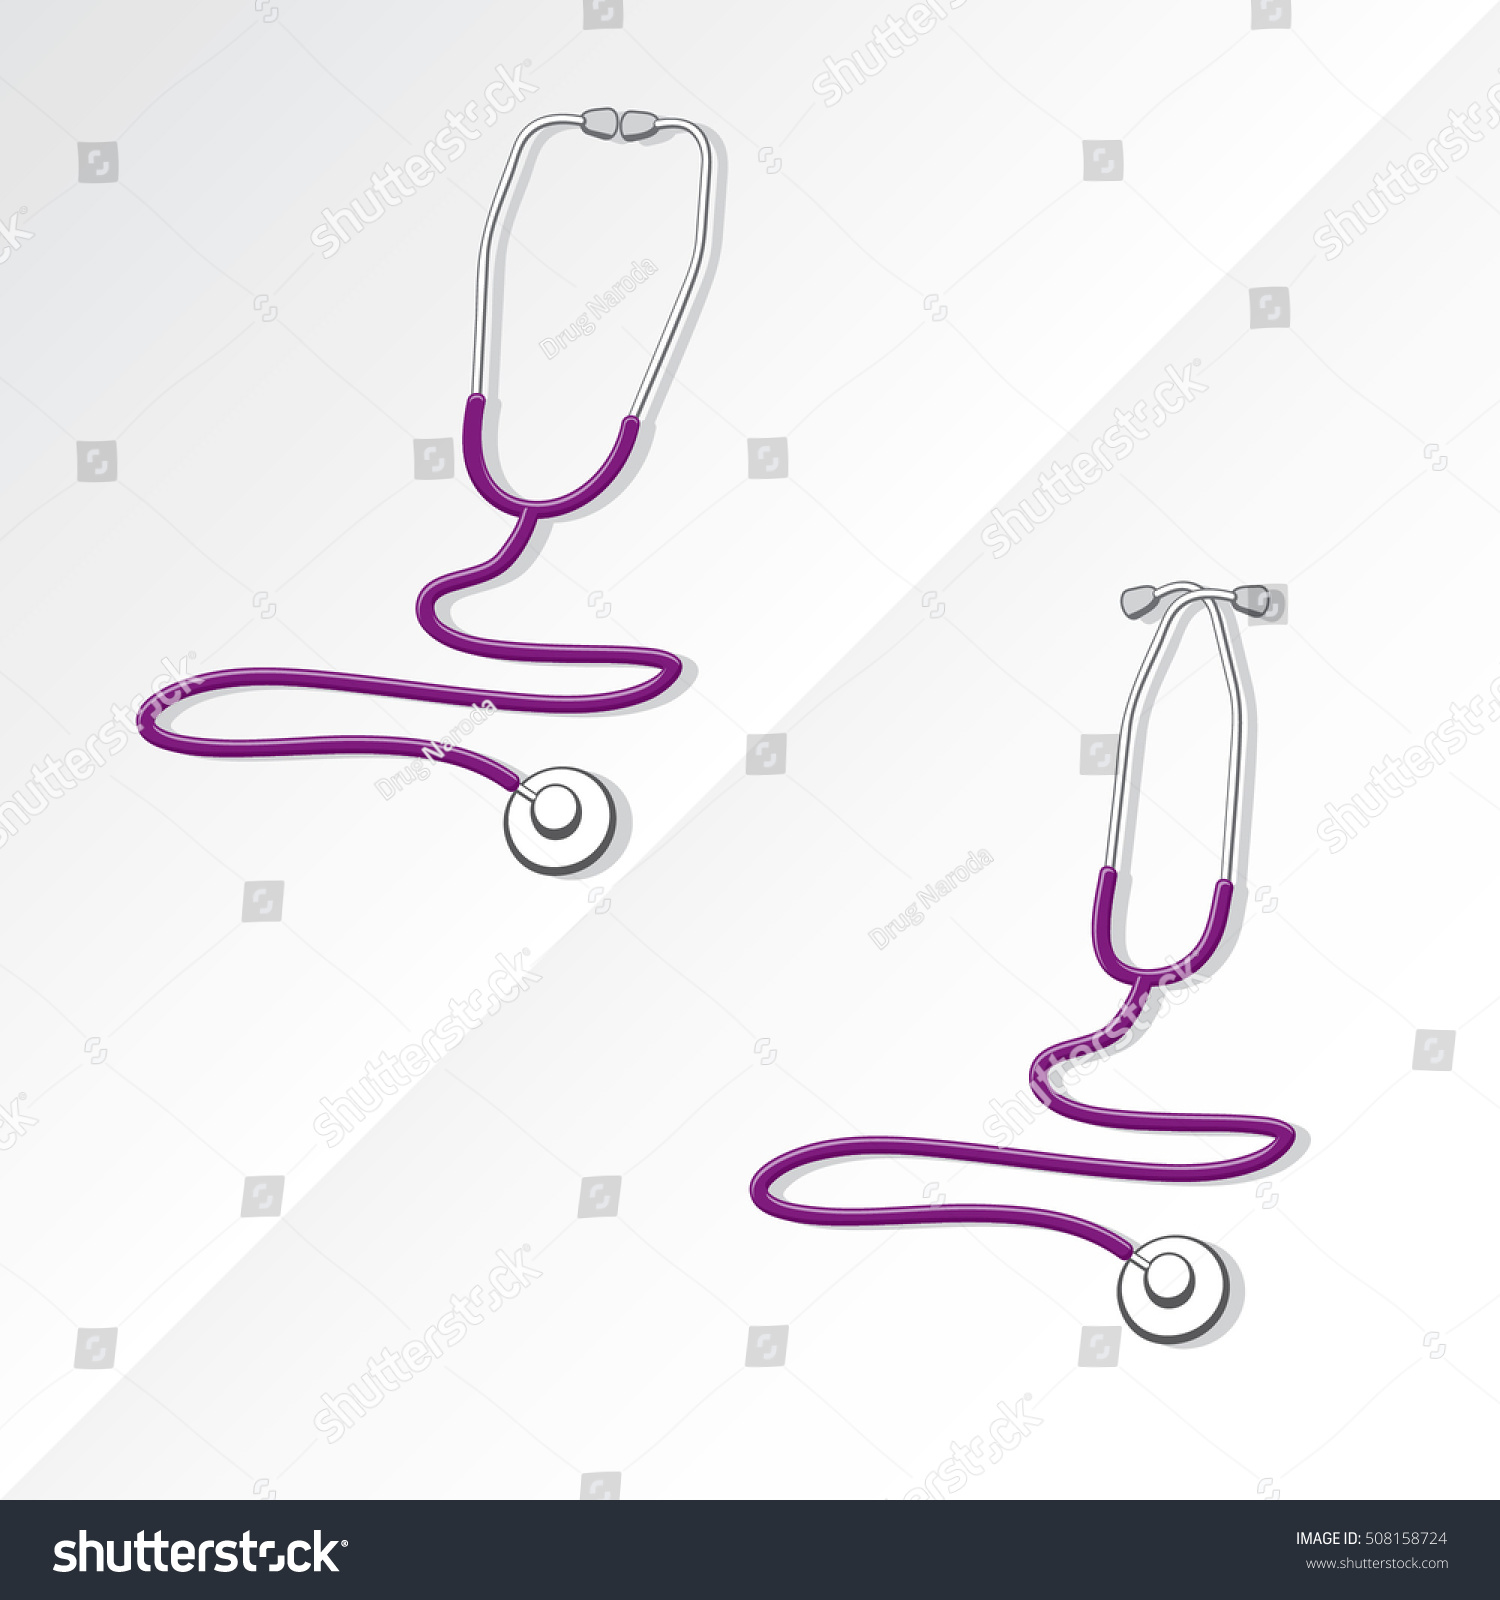 SVG of Two Medical Stethoscopes with Zigzag Shape Tubing Icons Set One with Crossed Binaural Another with Eartips Put Together - Grayscale and Purple Objects on White Background - Realistic Flat Design svg